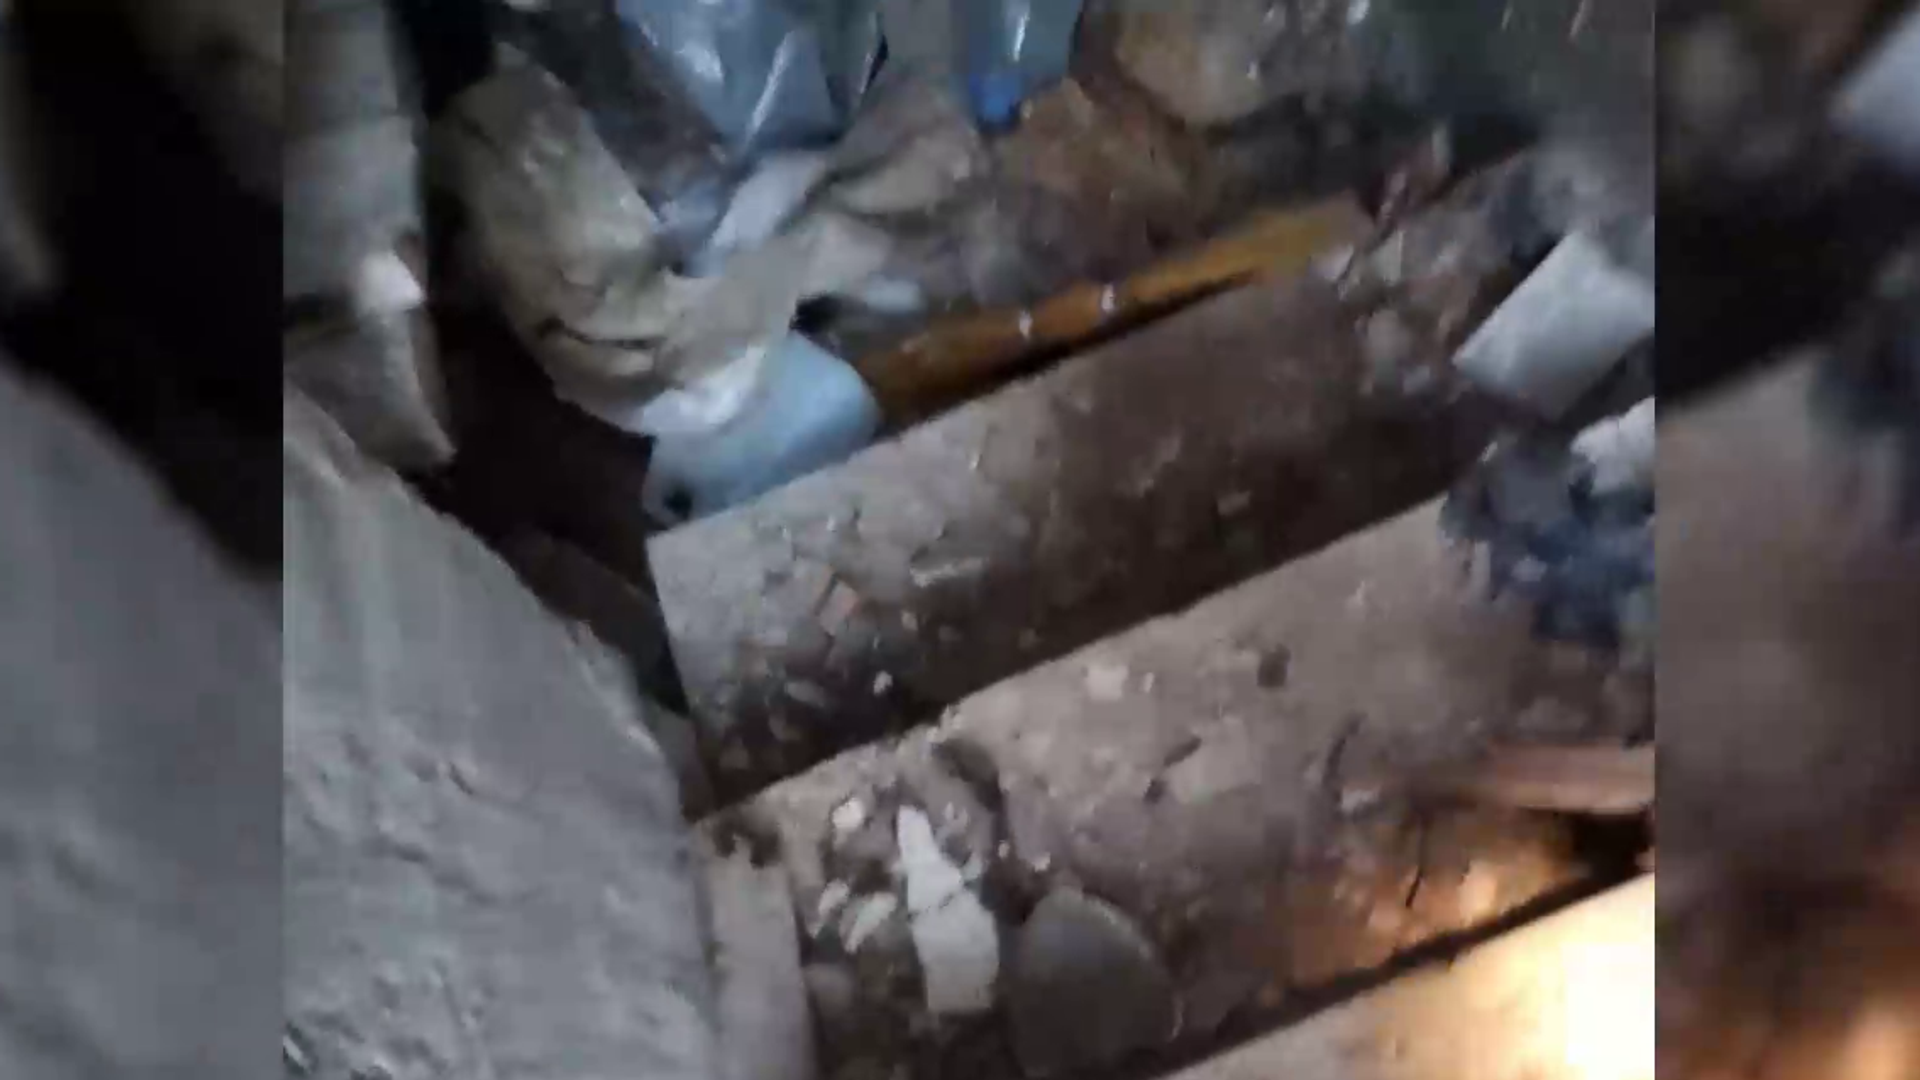 Still from grizzly video of torture chamber near Kherson, Ukraine containing body of what Russian investigators fear is a Russian servicemen tortured to death by Ukrainian troops or nationalist formations. - Sputnik International, 1920, 03.05.2022